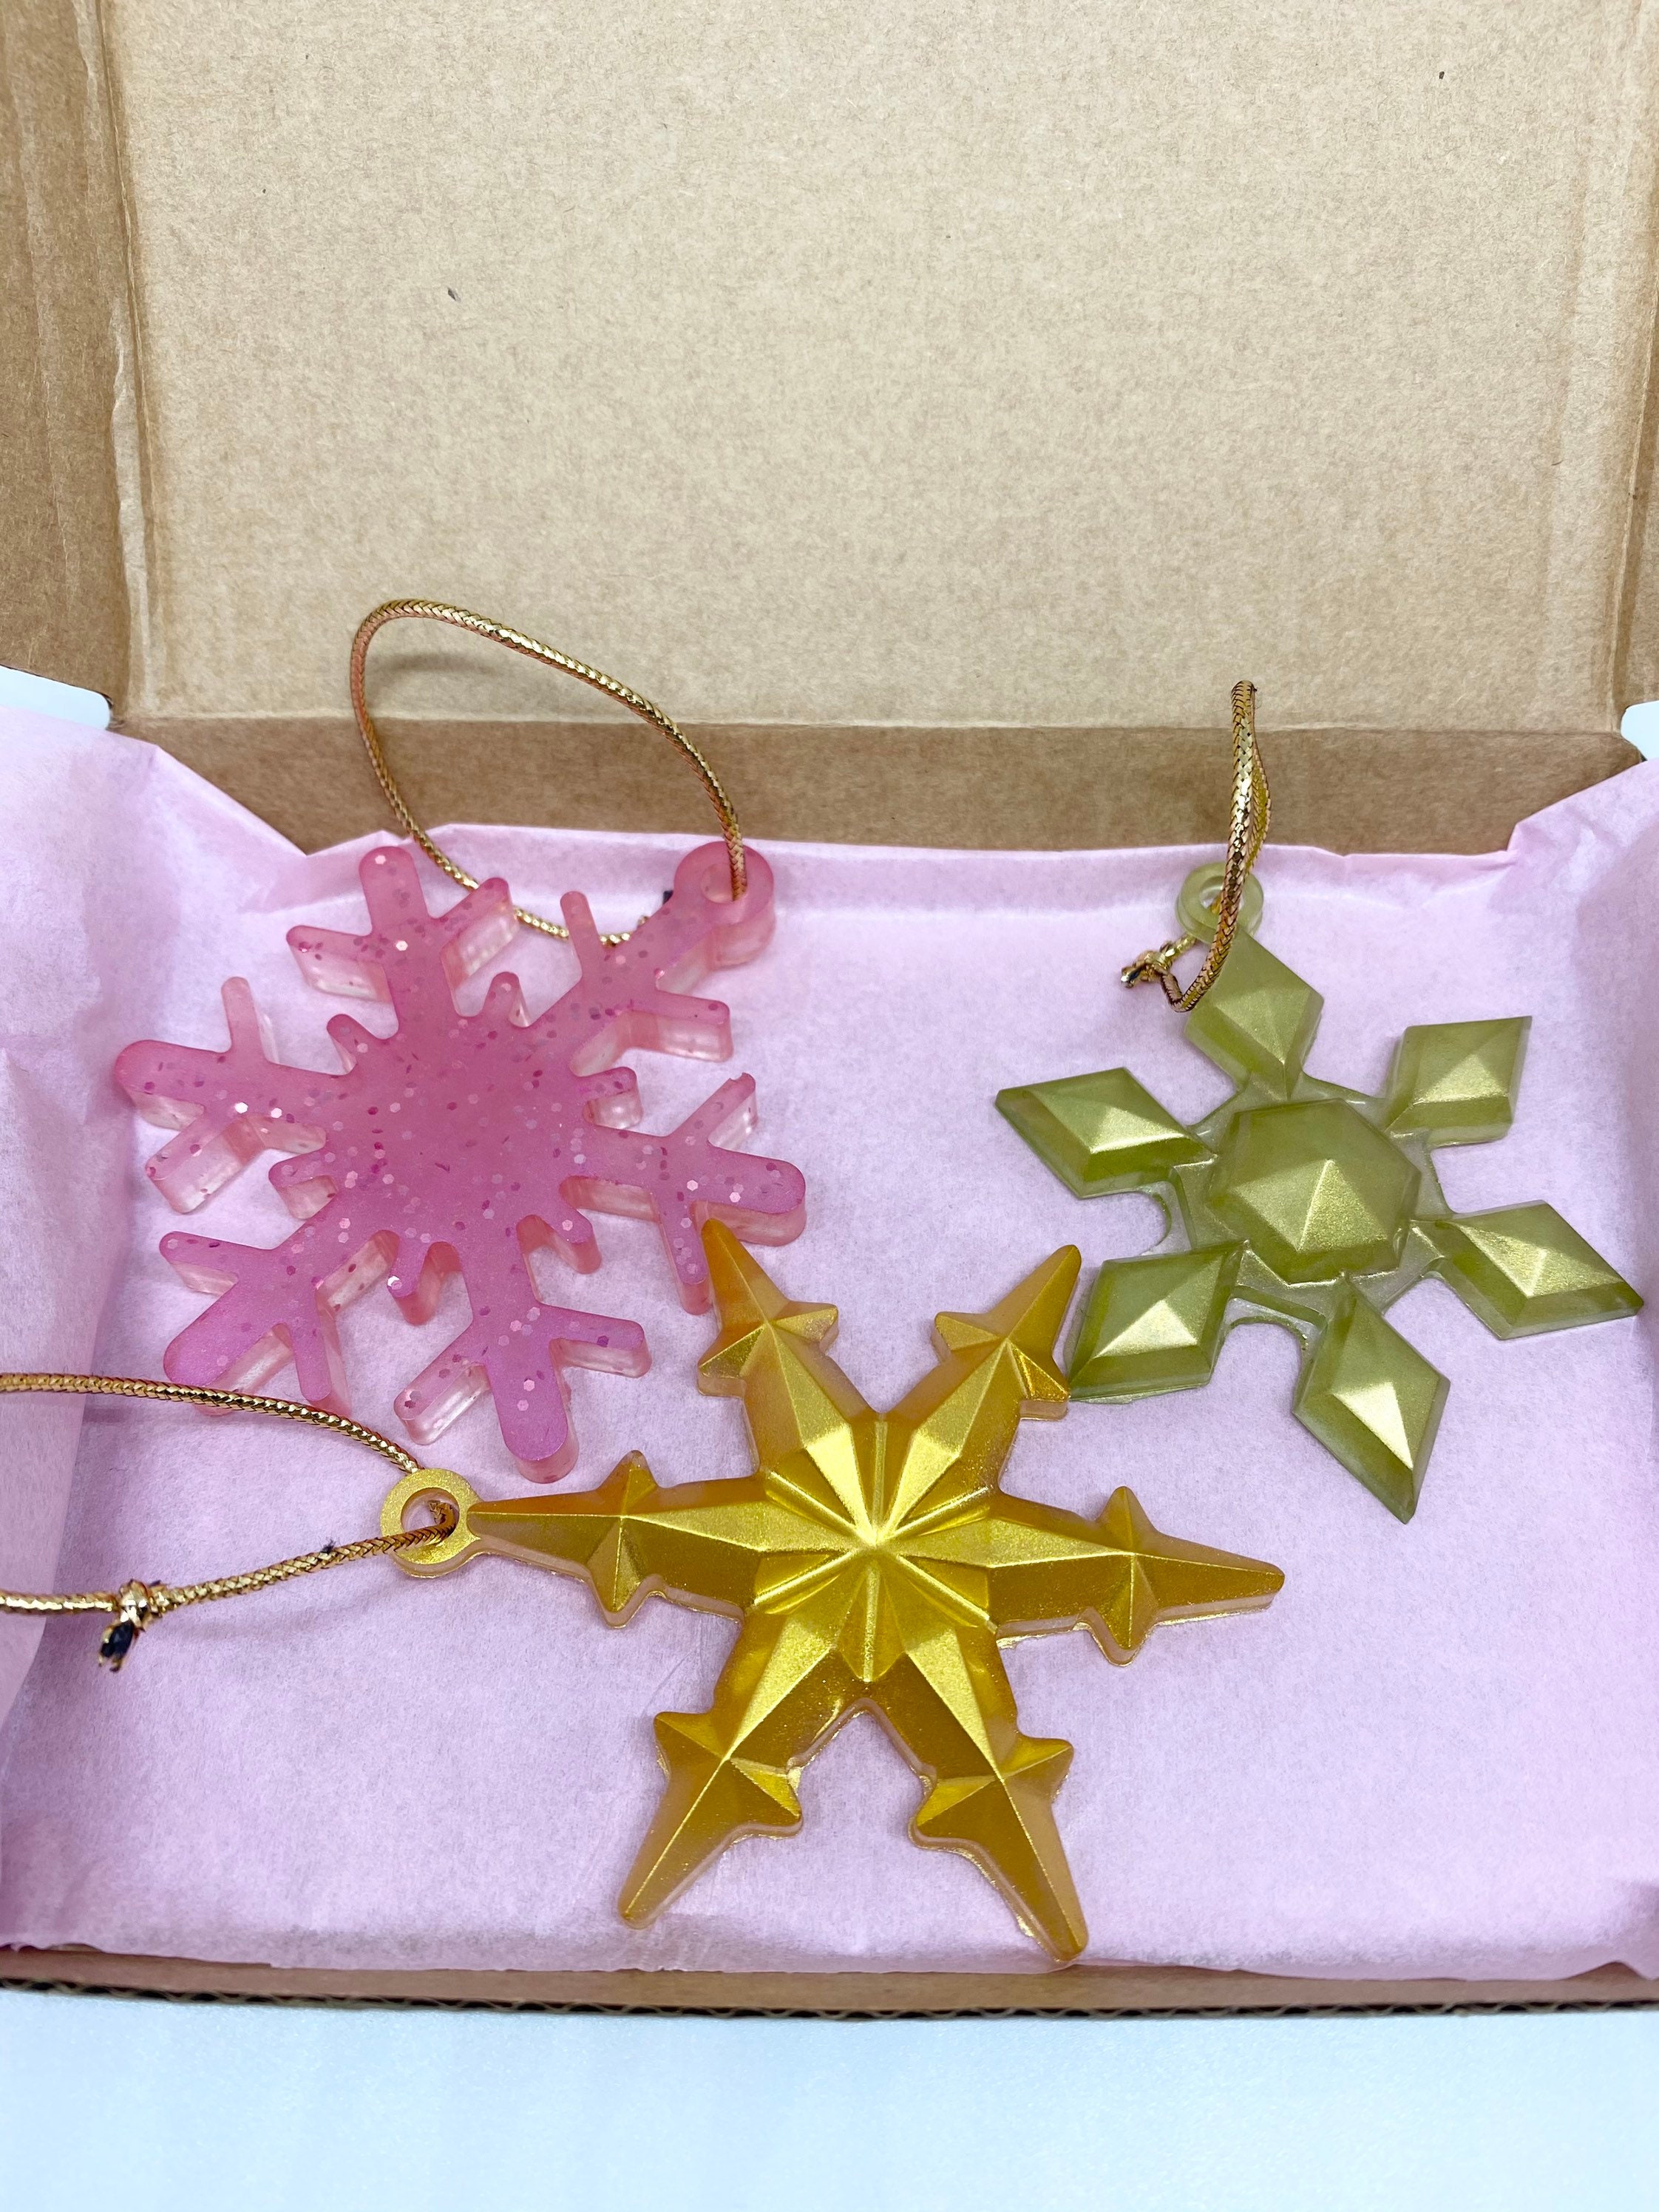 Jewel Tone Snowflakes And Holographic Snowflakes Holiday